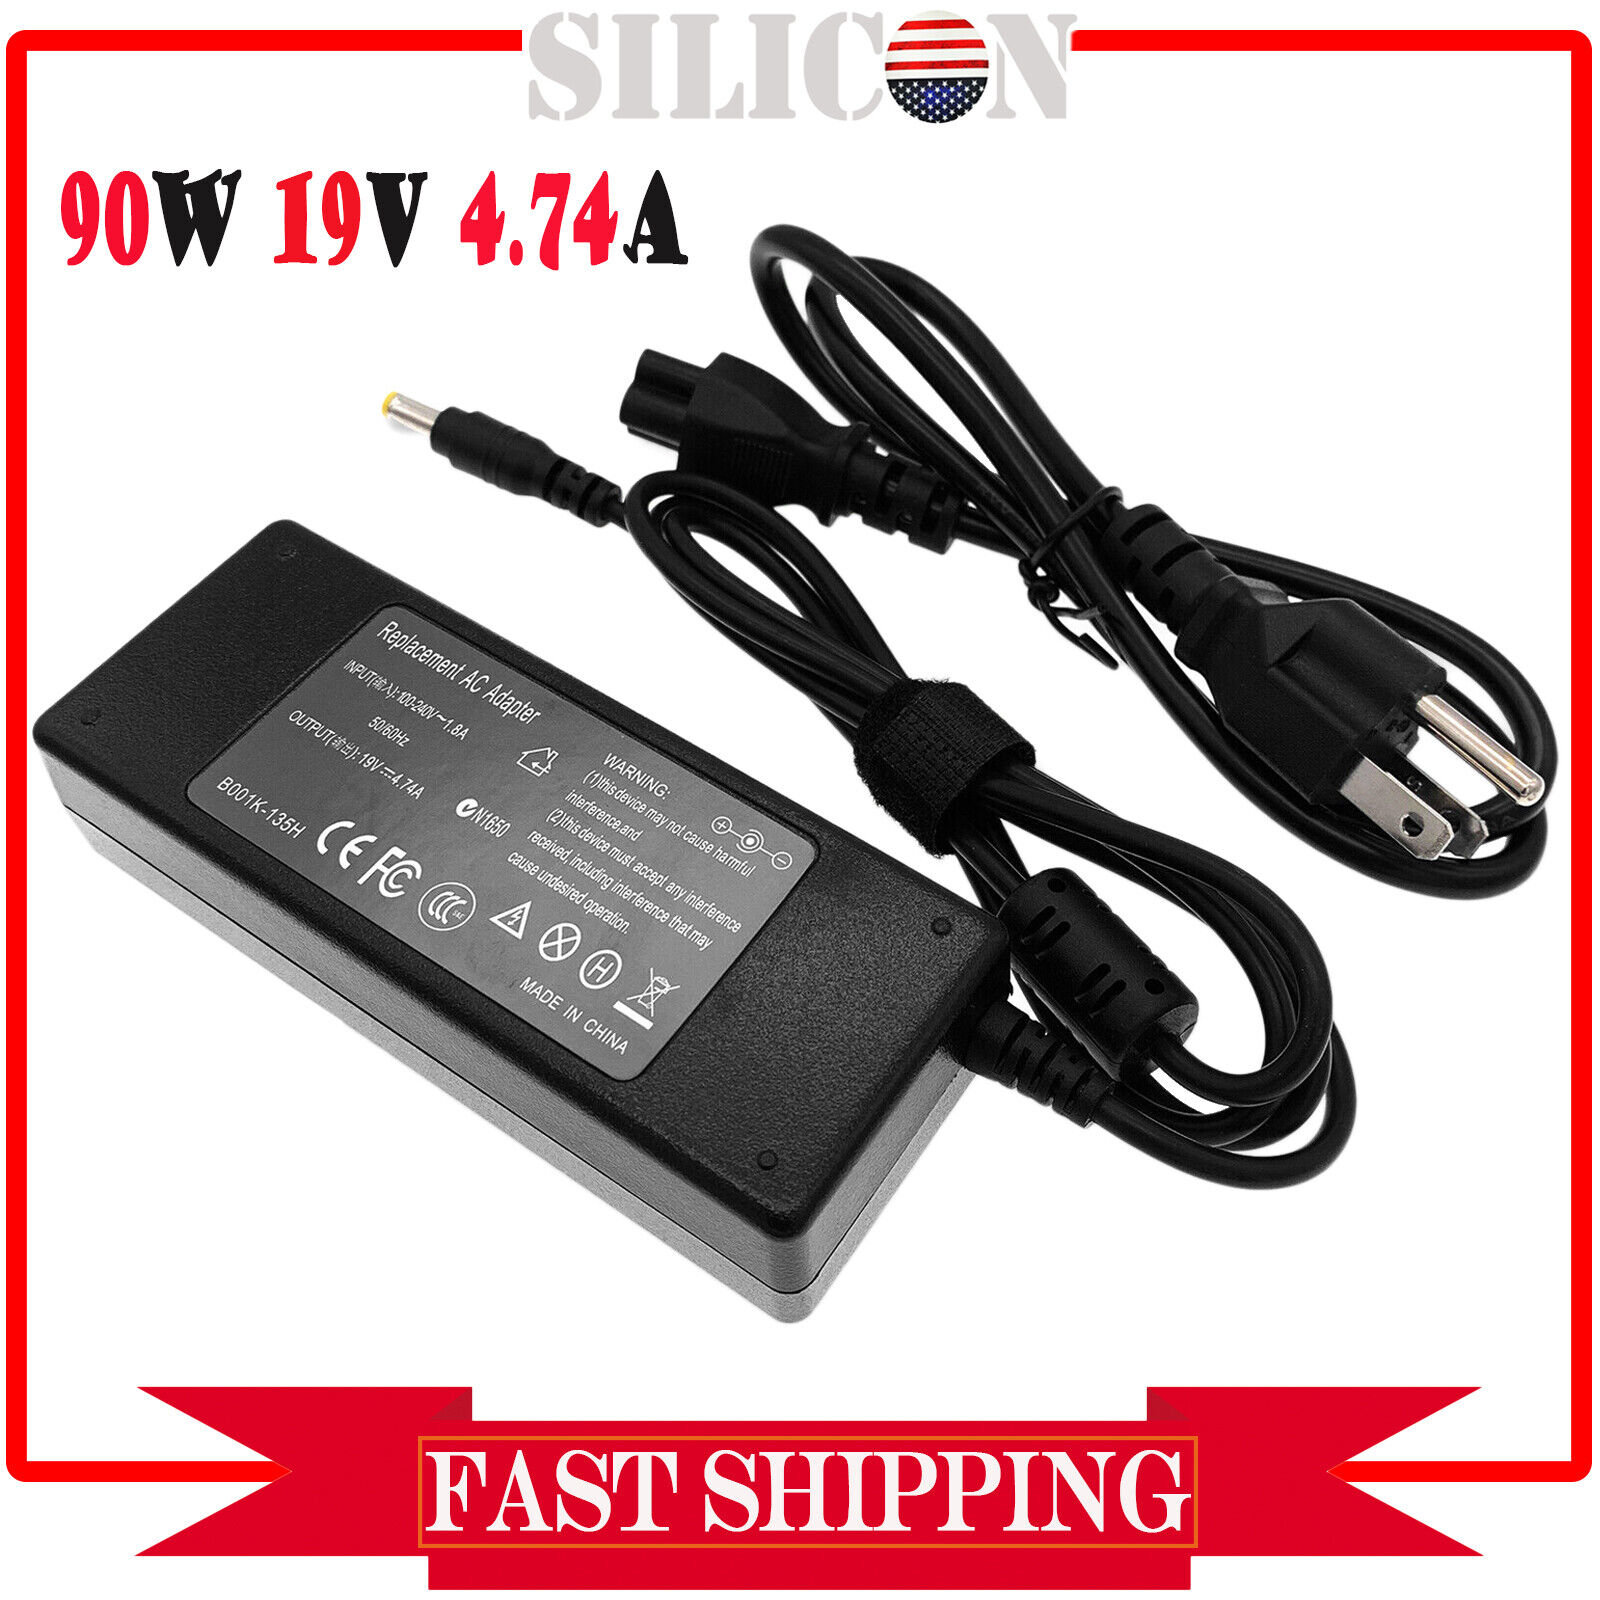 19V 4.74A 90W AC Adapter For Acer Liteon PA-1900-34 Laptop Charger Power Supply